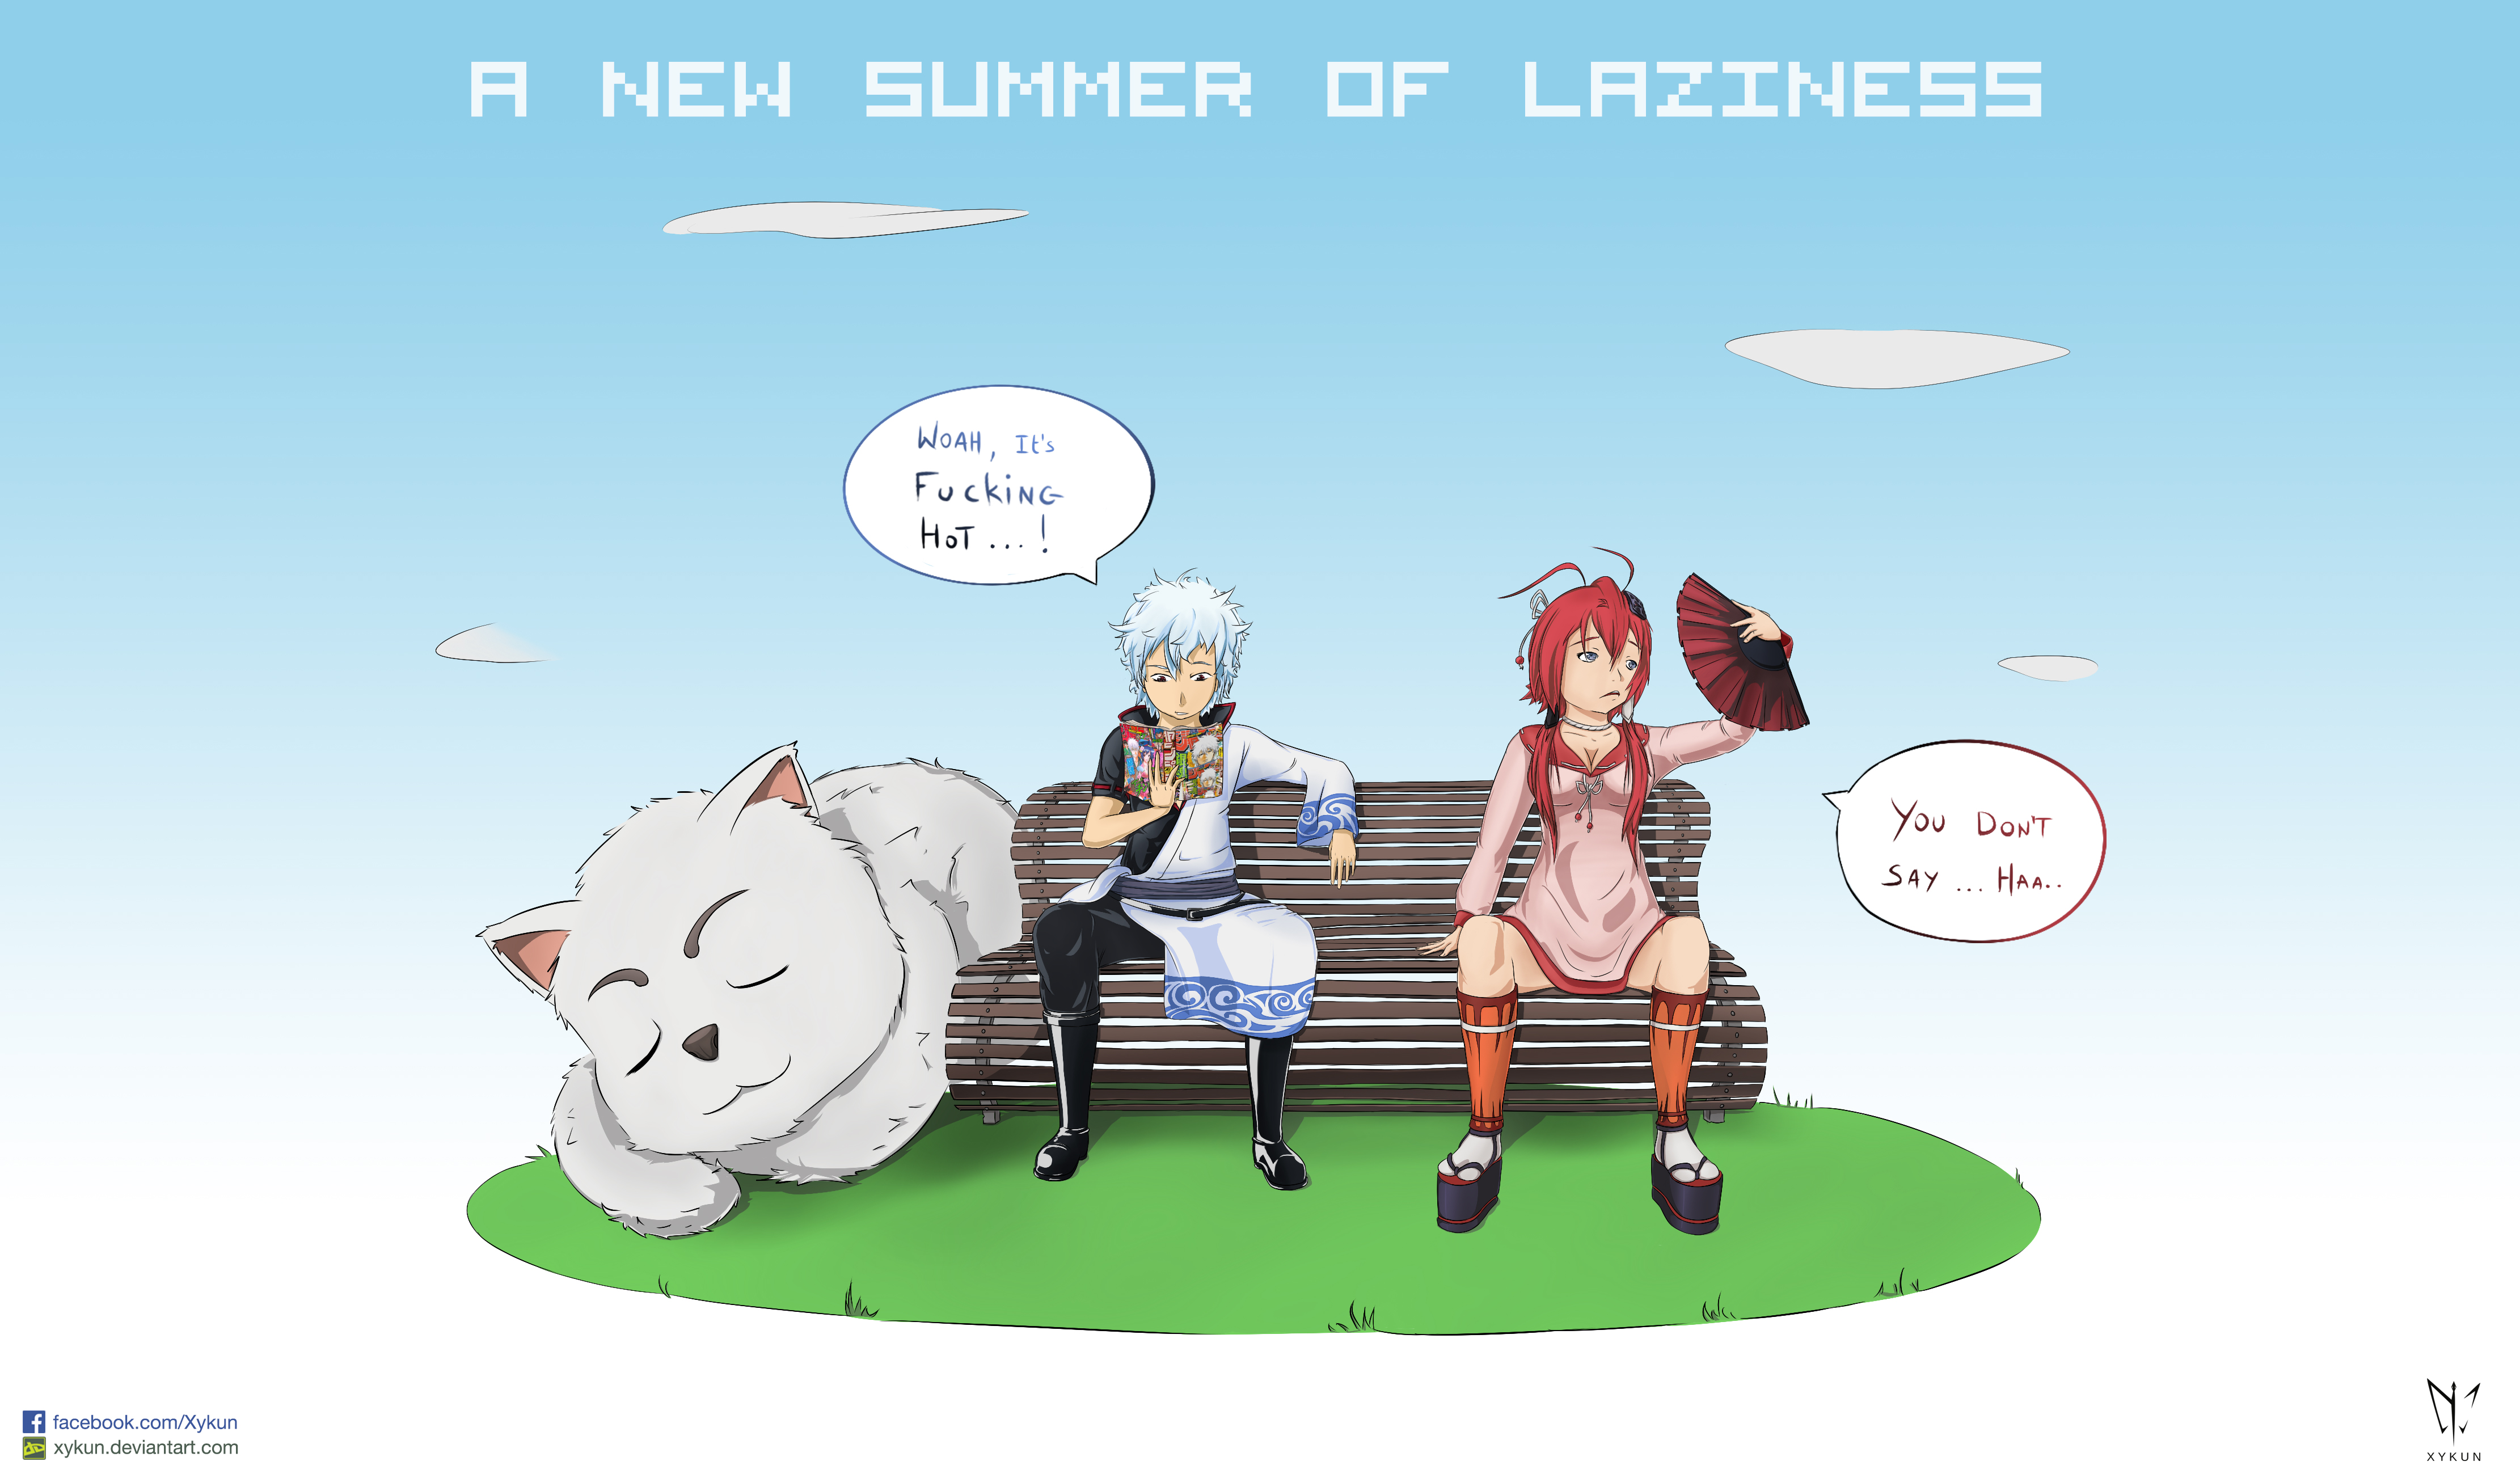 A new summer of laziness